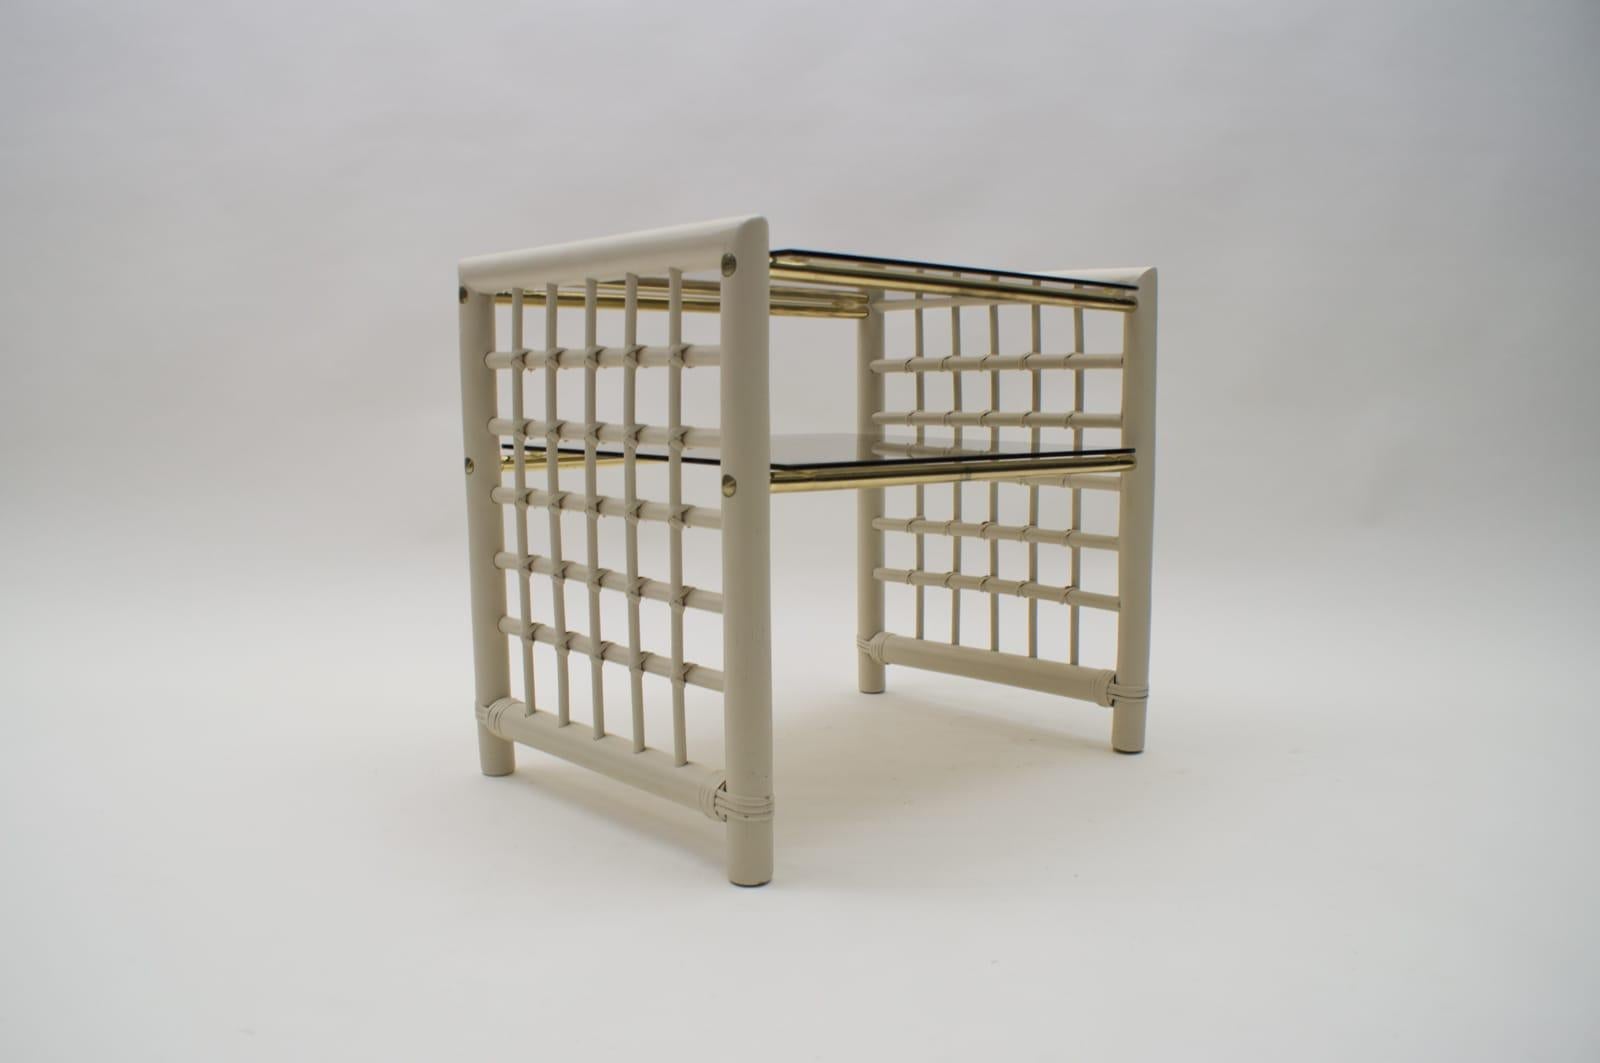 Italian Hollywood Regency Nightstand Made in Bamboo, Brass with Smoked Glass, 1970s For Sale